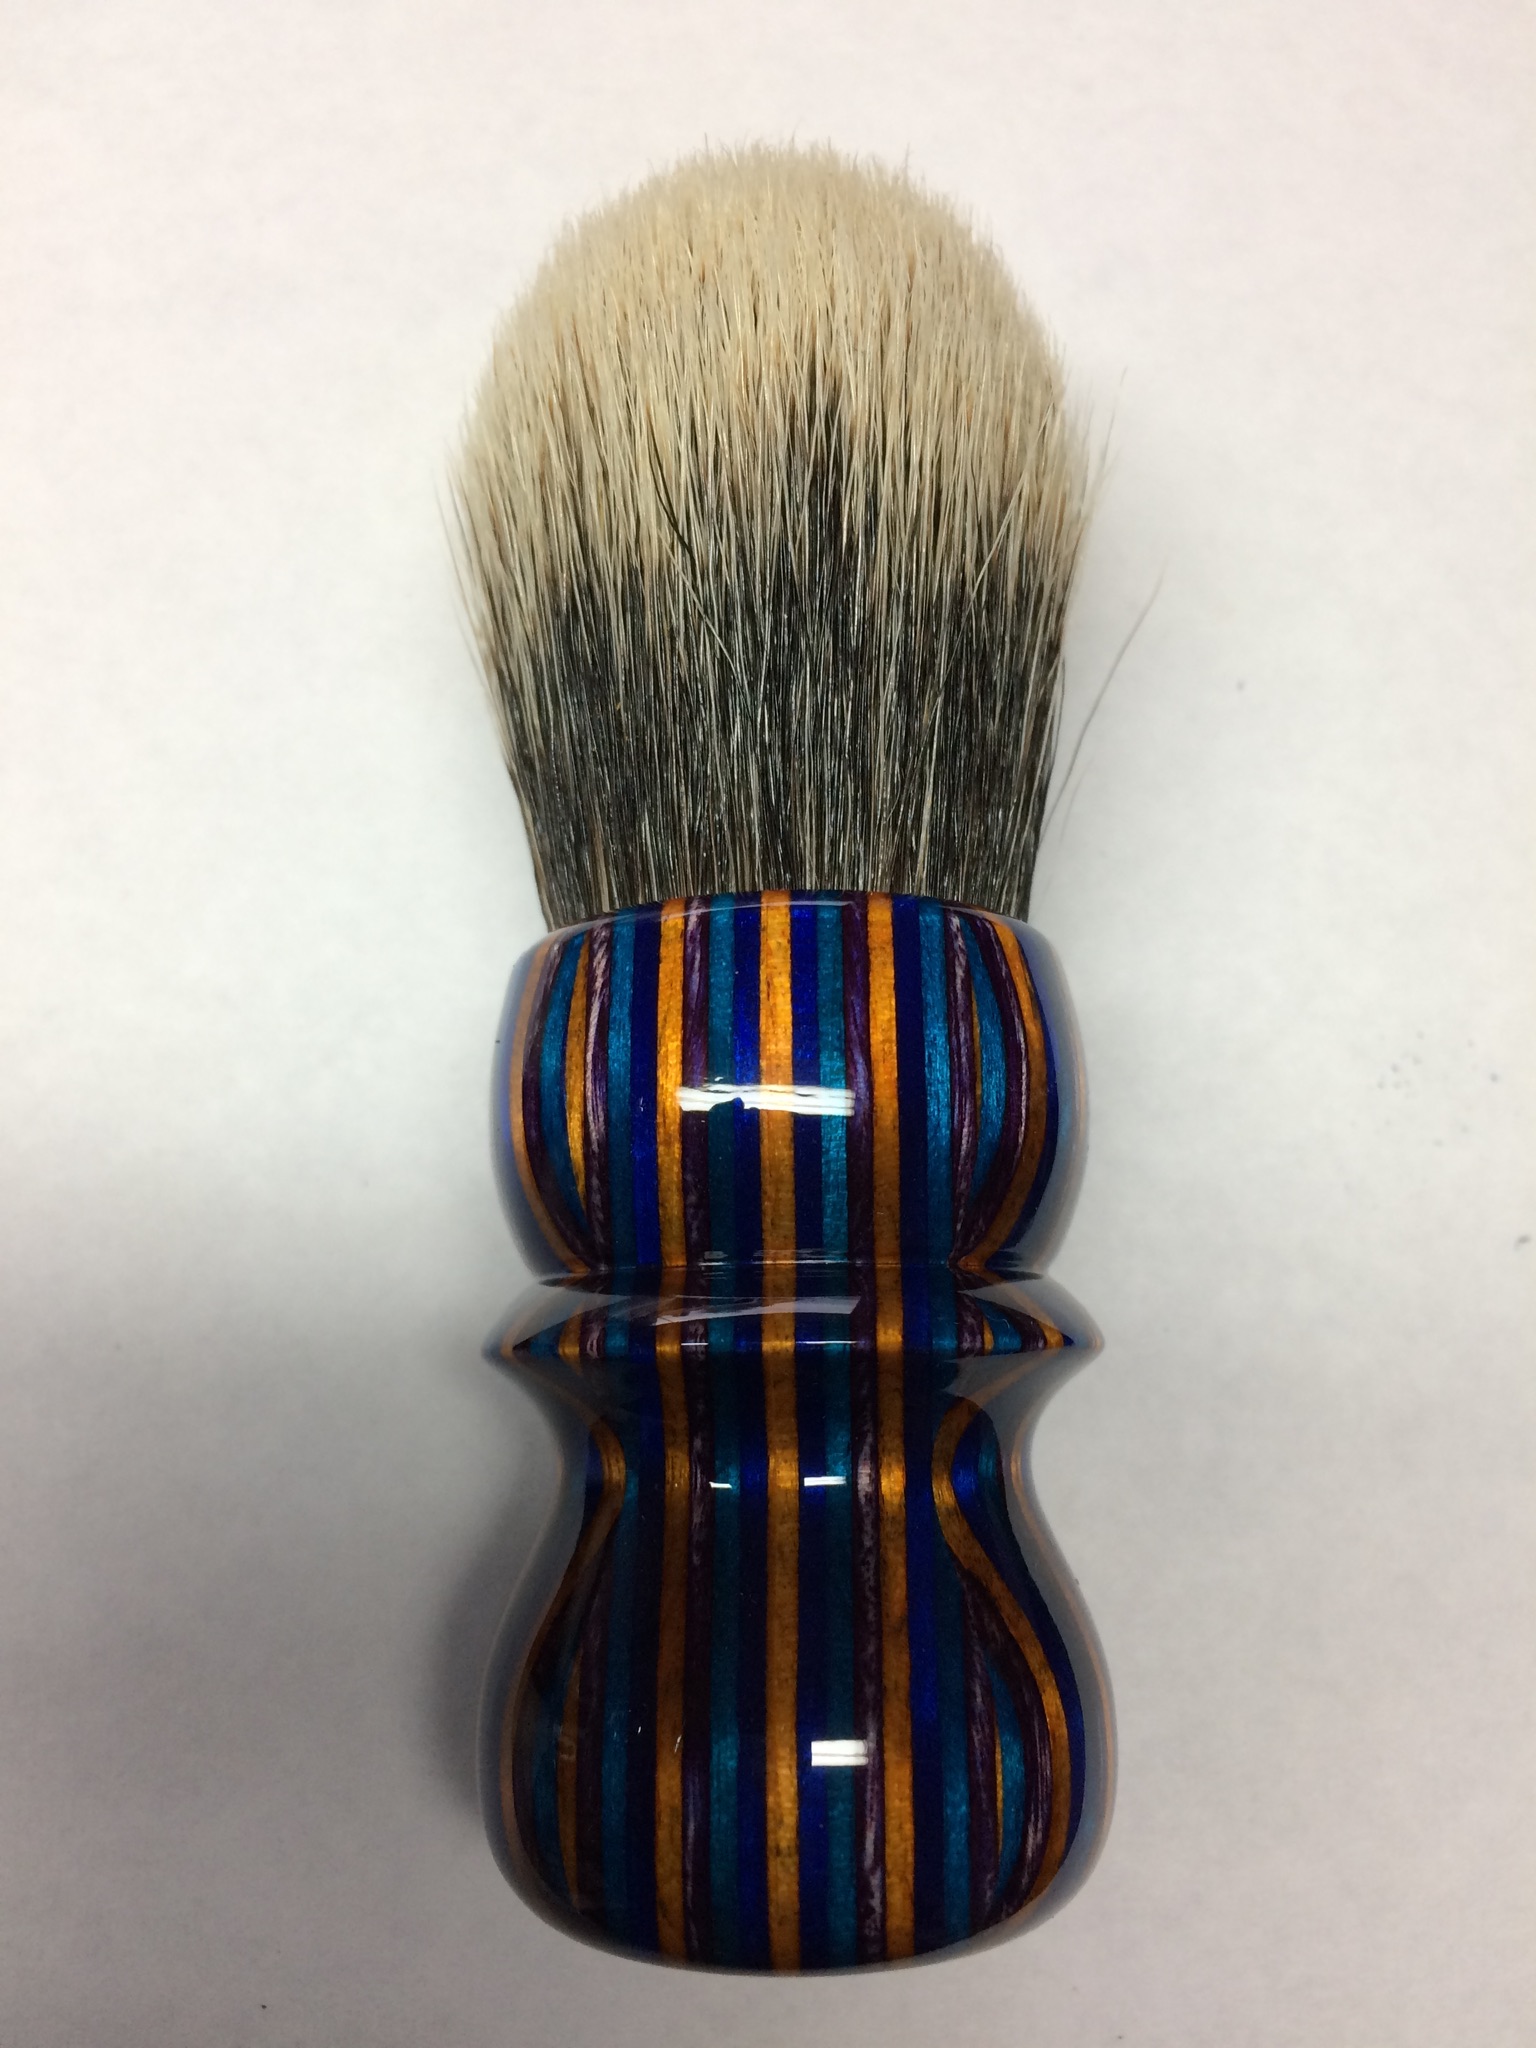 Modified spectraply brush